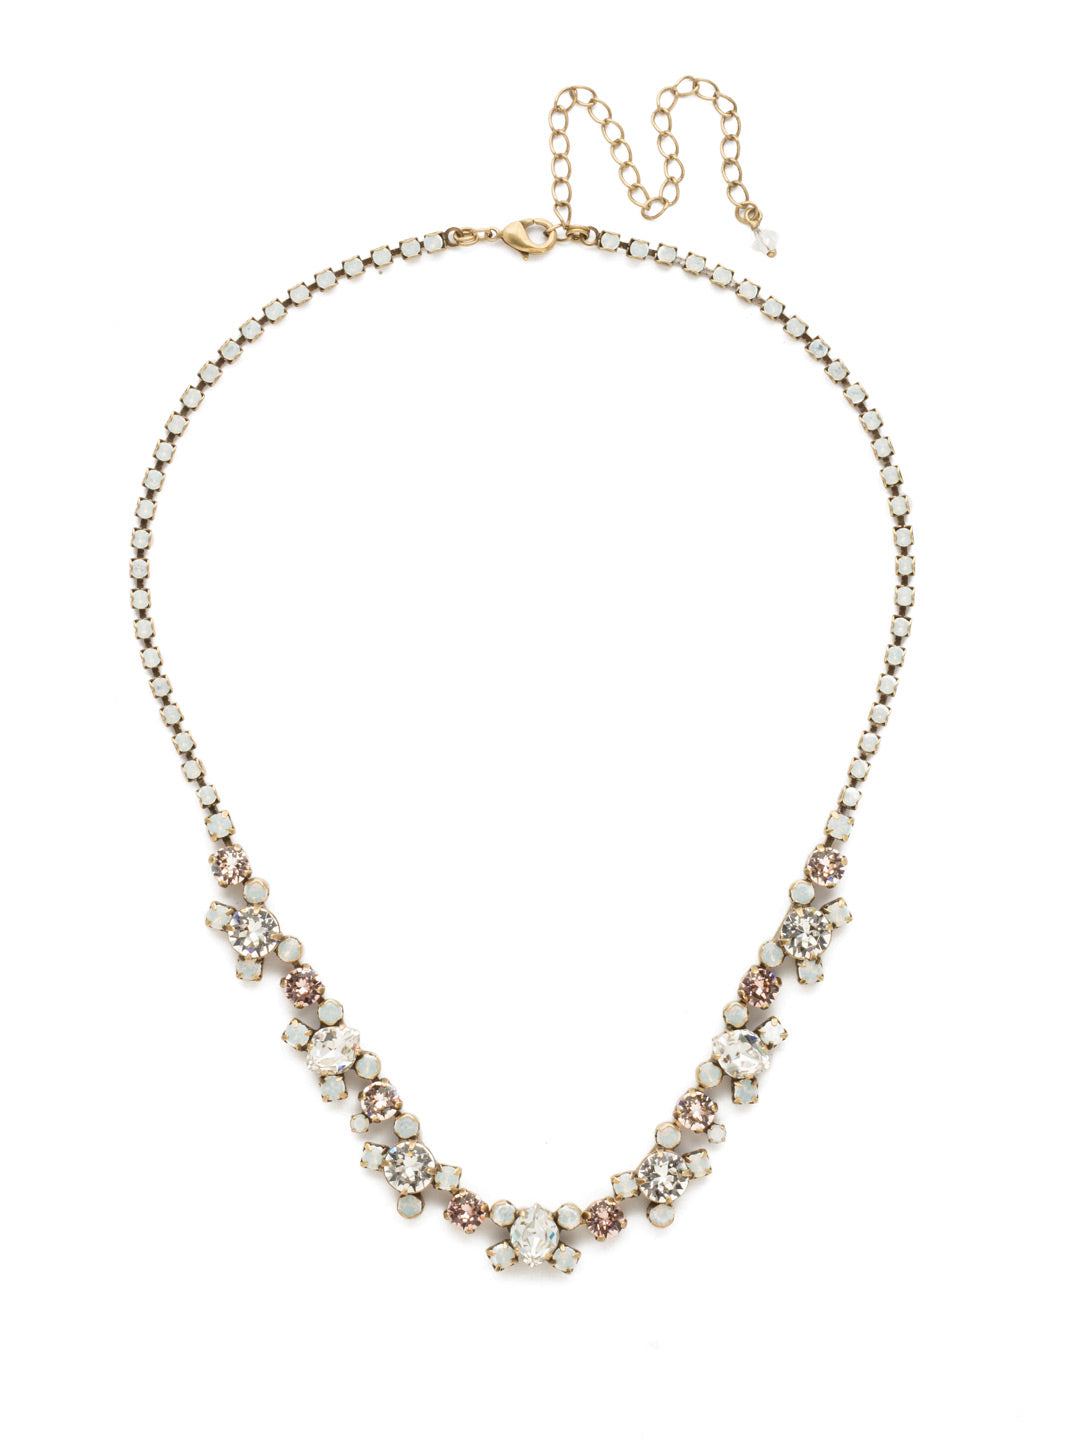 Perfect Harmony Line Necklace - NDK11AGWMA - This classic line necklace features stations of crystal clusters alternating between round cut and pear shaped central stones, blending in perfect harmony! A rhinestone chain completes this design with all around sparkle.